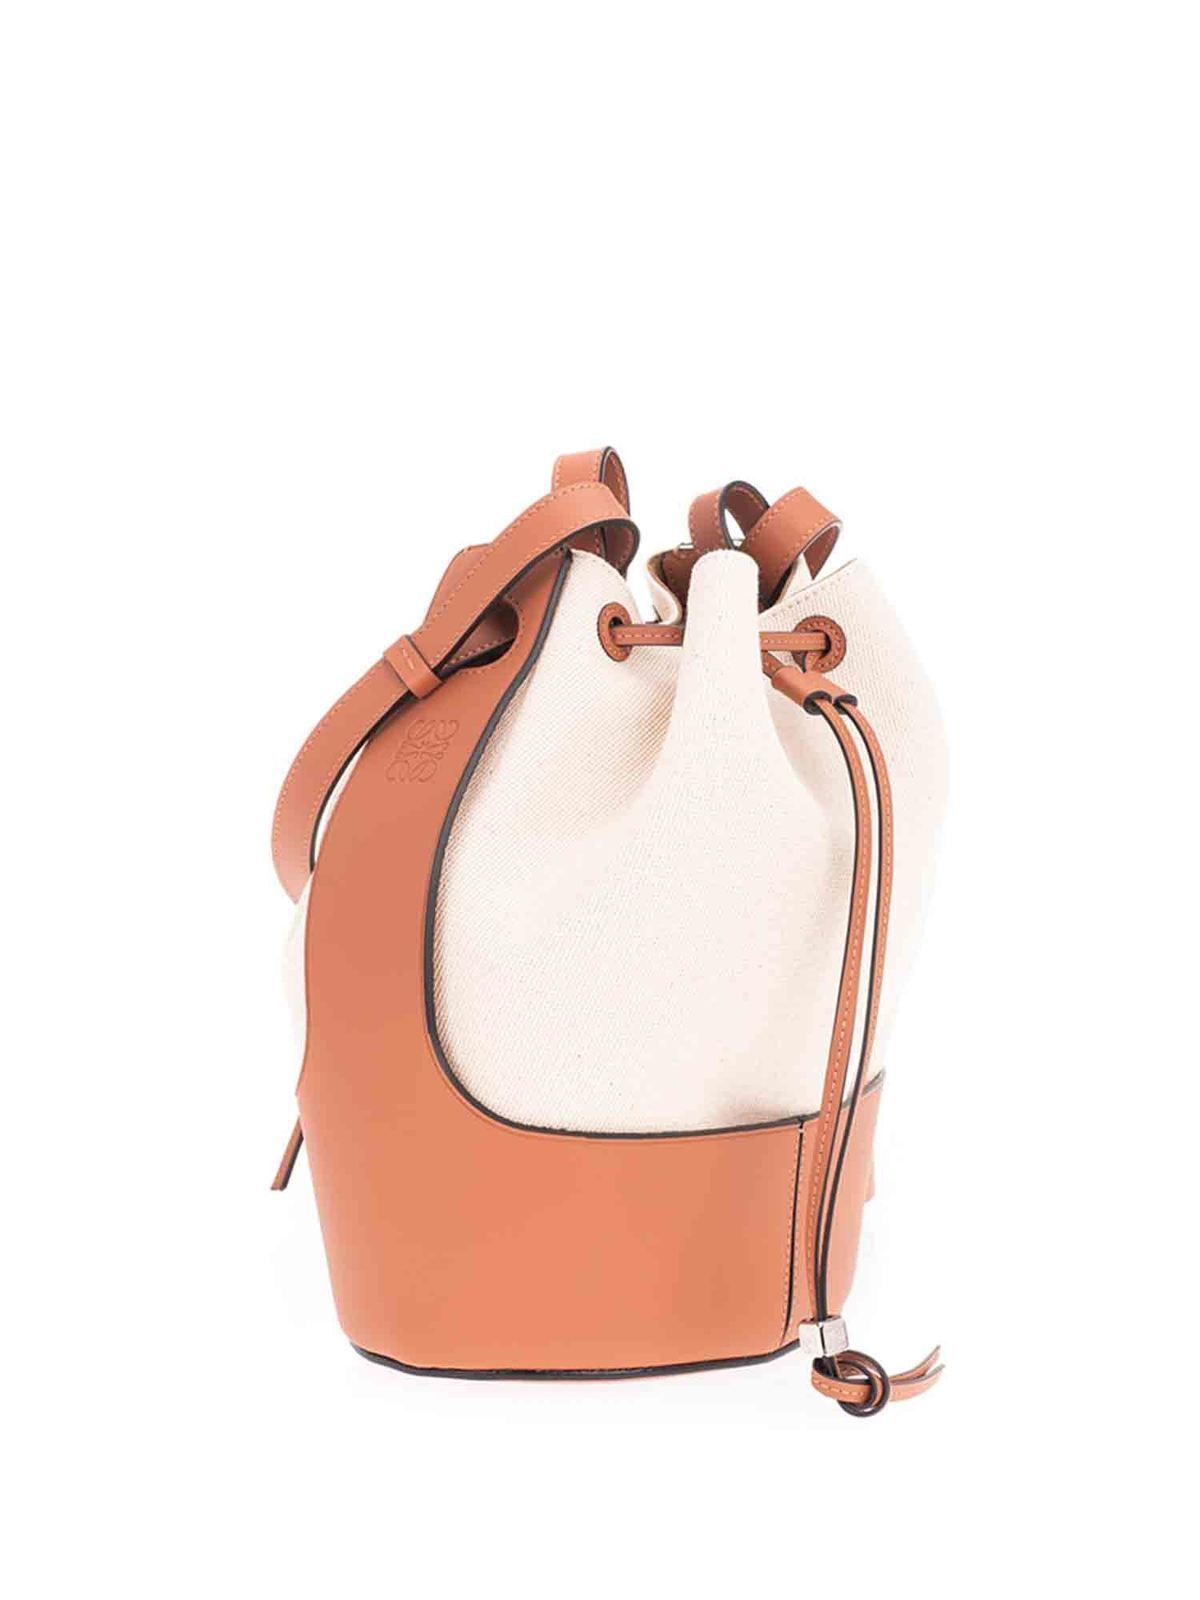 Rode datum Scully insluiten Bucket bags Loewe - Balloon bag in canvas and brown leather - 32638AC302426